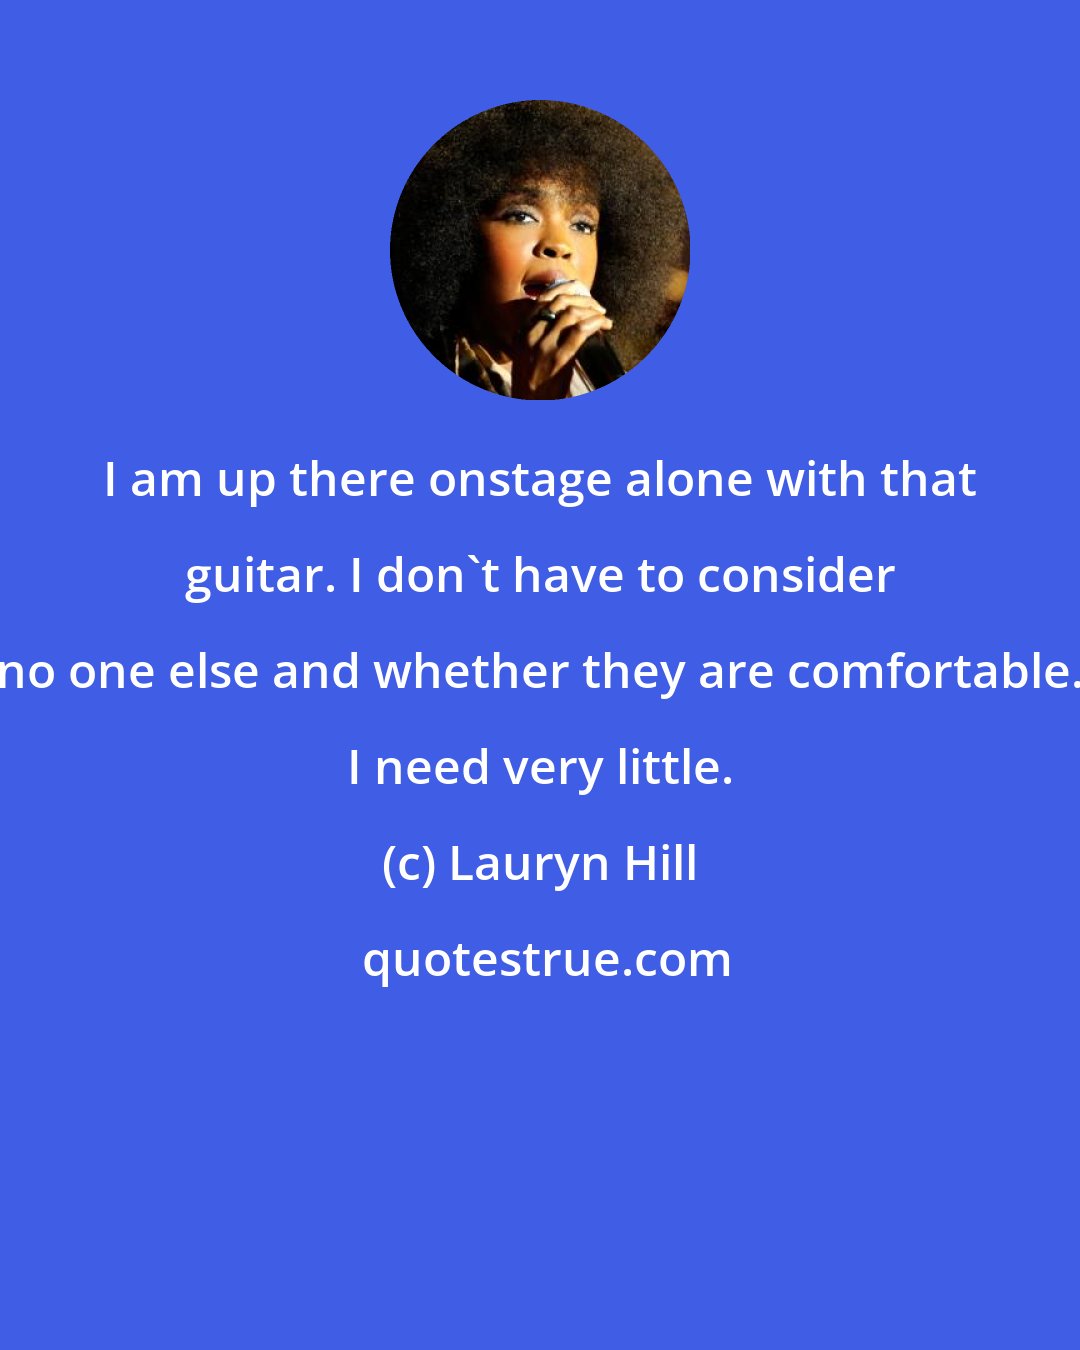 Lauryn Hill: I am up there onstage alone with that guitar. I don't have to consider no one else and whether they are comfortable. I need very little.